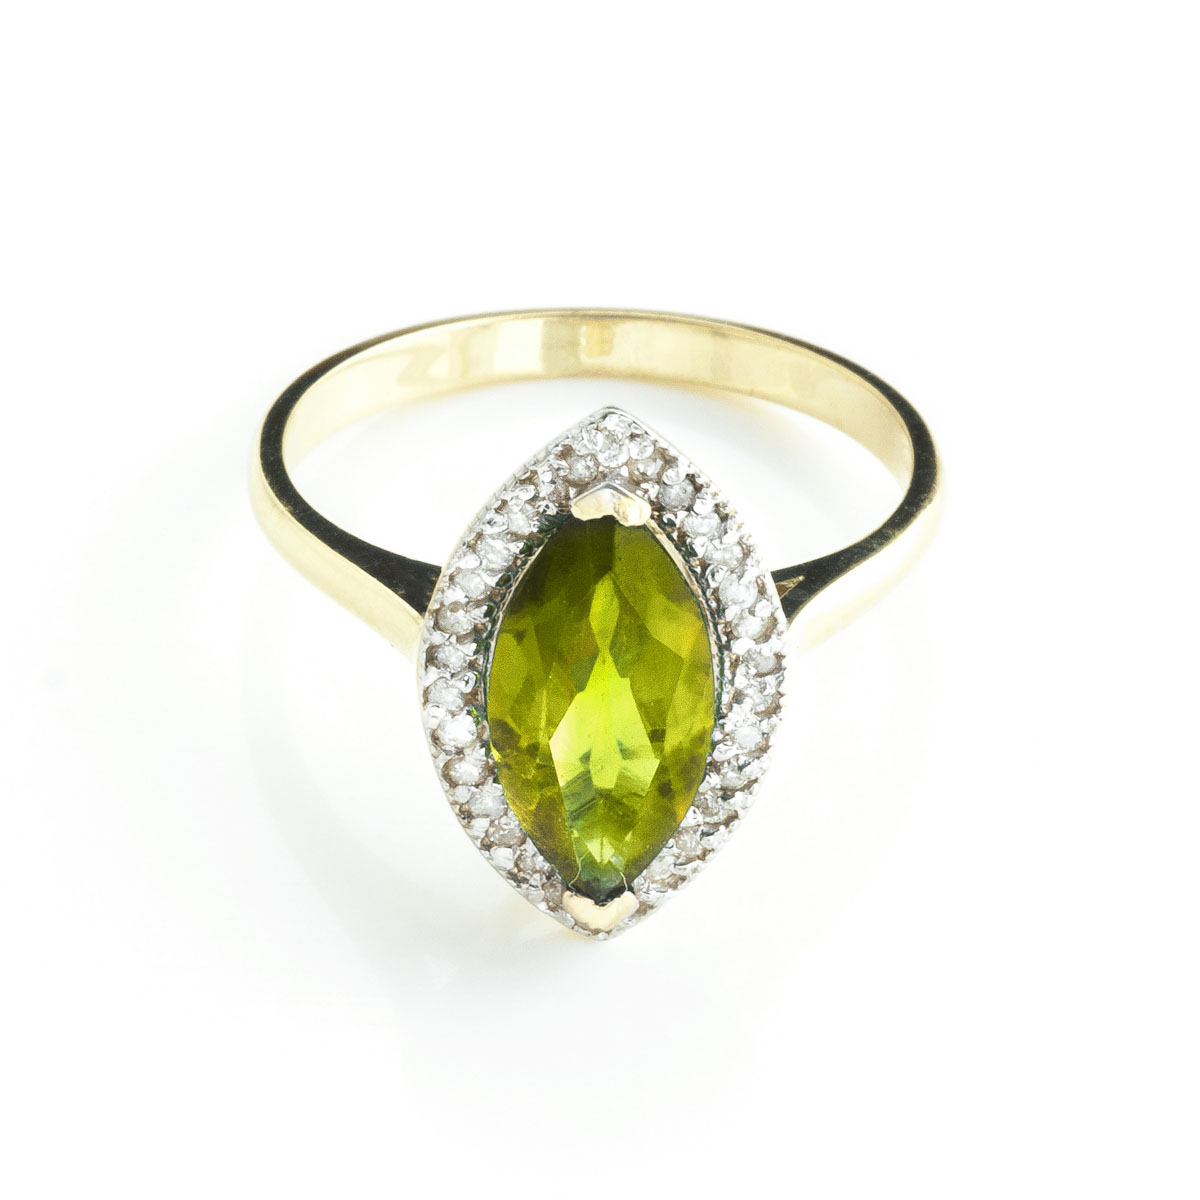 Peridot Halo Ring 2.15 ctw in 18ct Gold